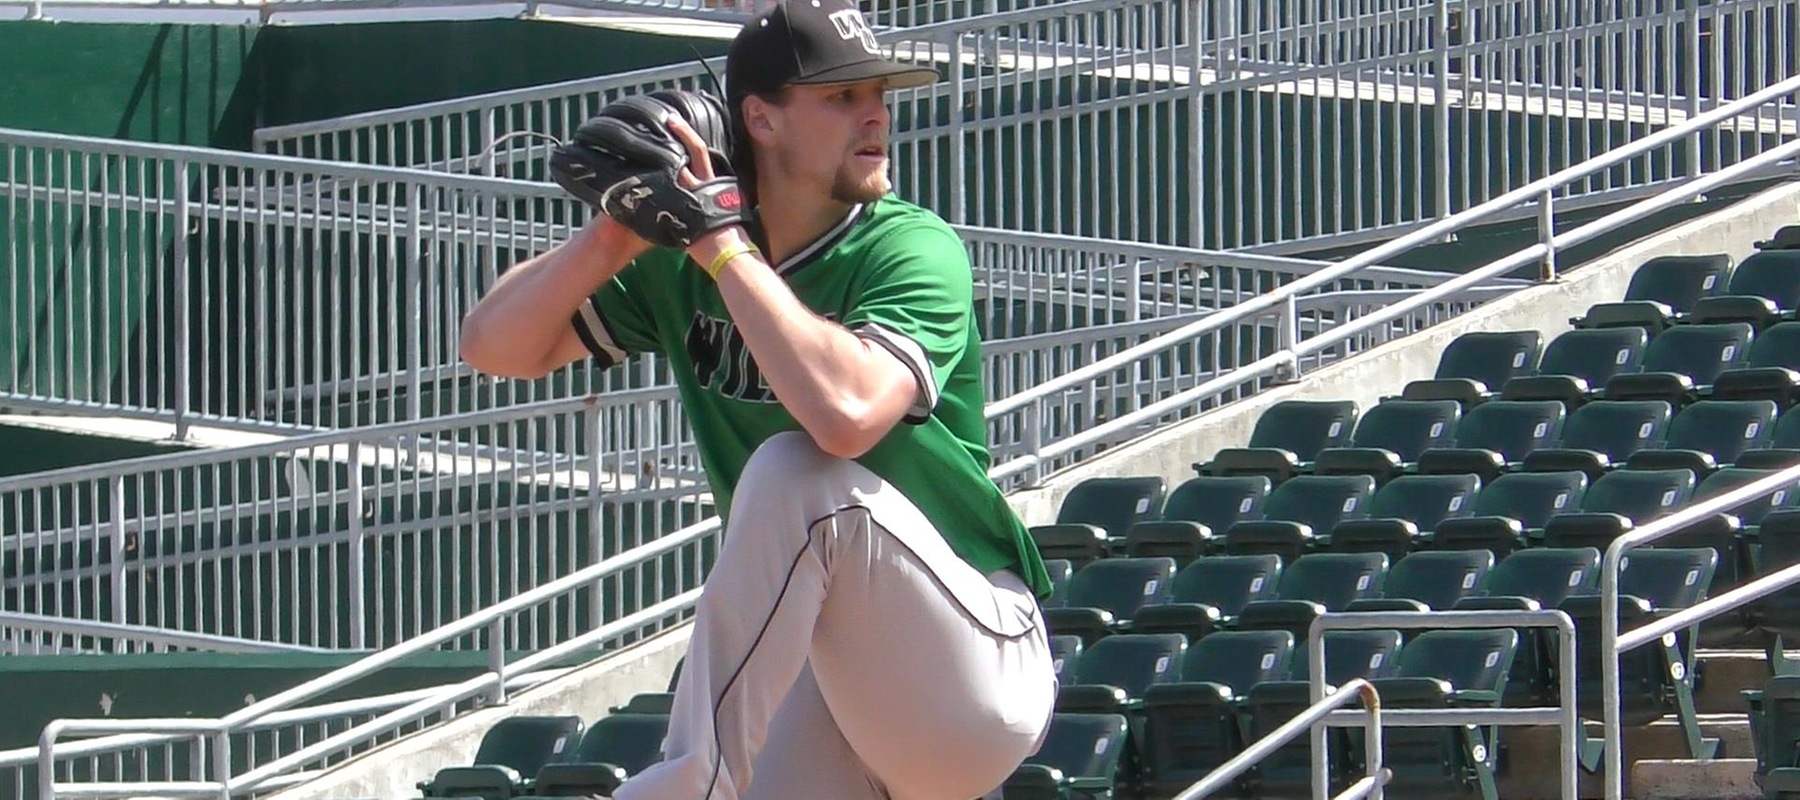 Photo of Ryan Sandberg who struck out 10 in a complete game shutout on Monday. Copyright 2022; Wilmington University. All rights reserved. Photo by Ric Edevane (College of Technology). April 4, 2022 at Nyack.